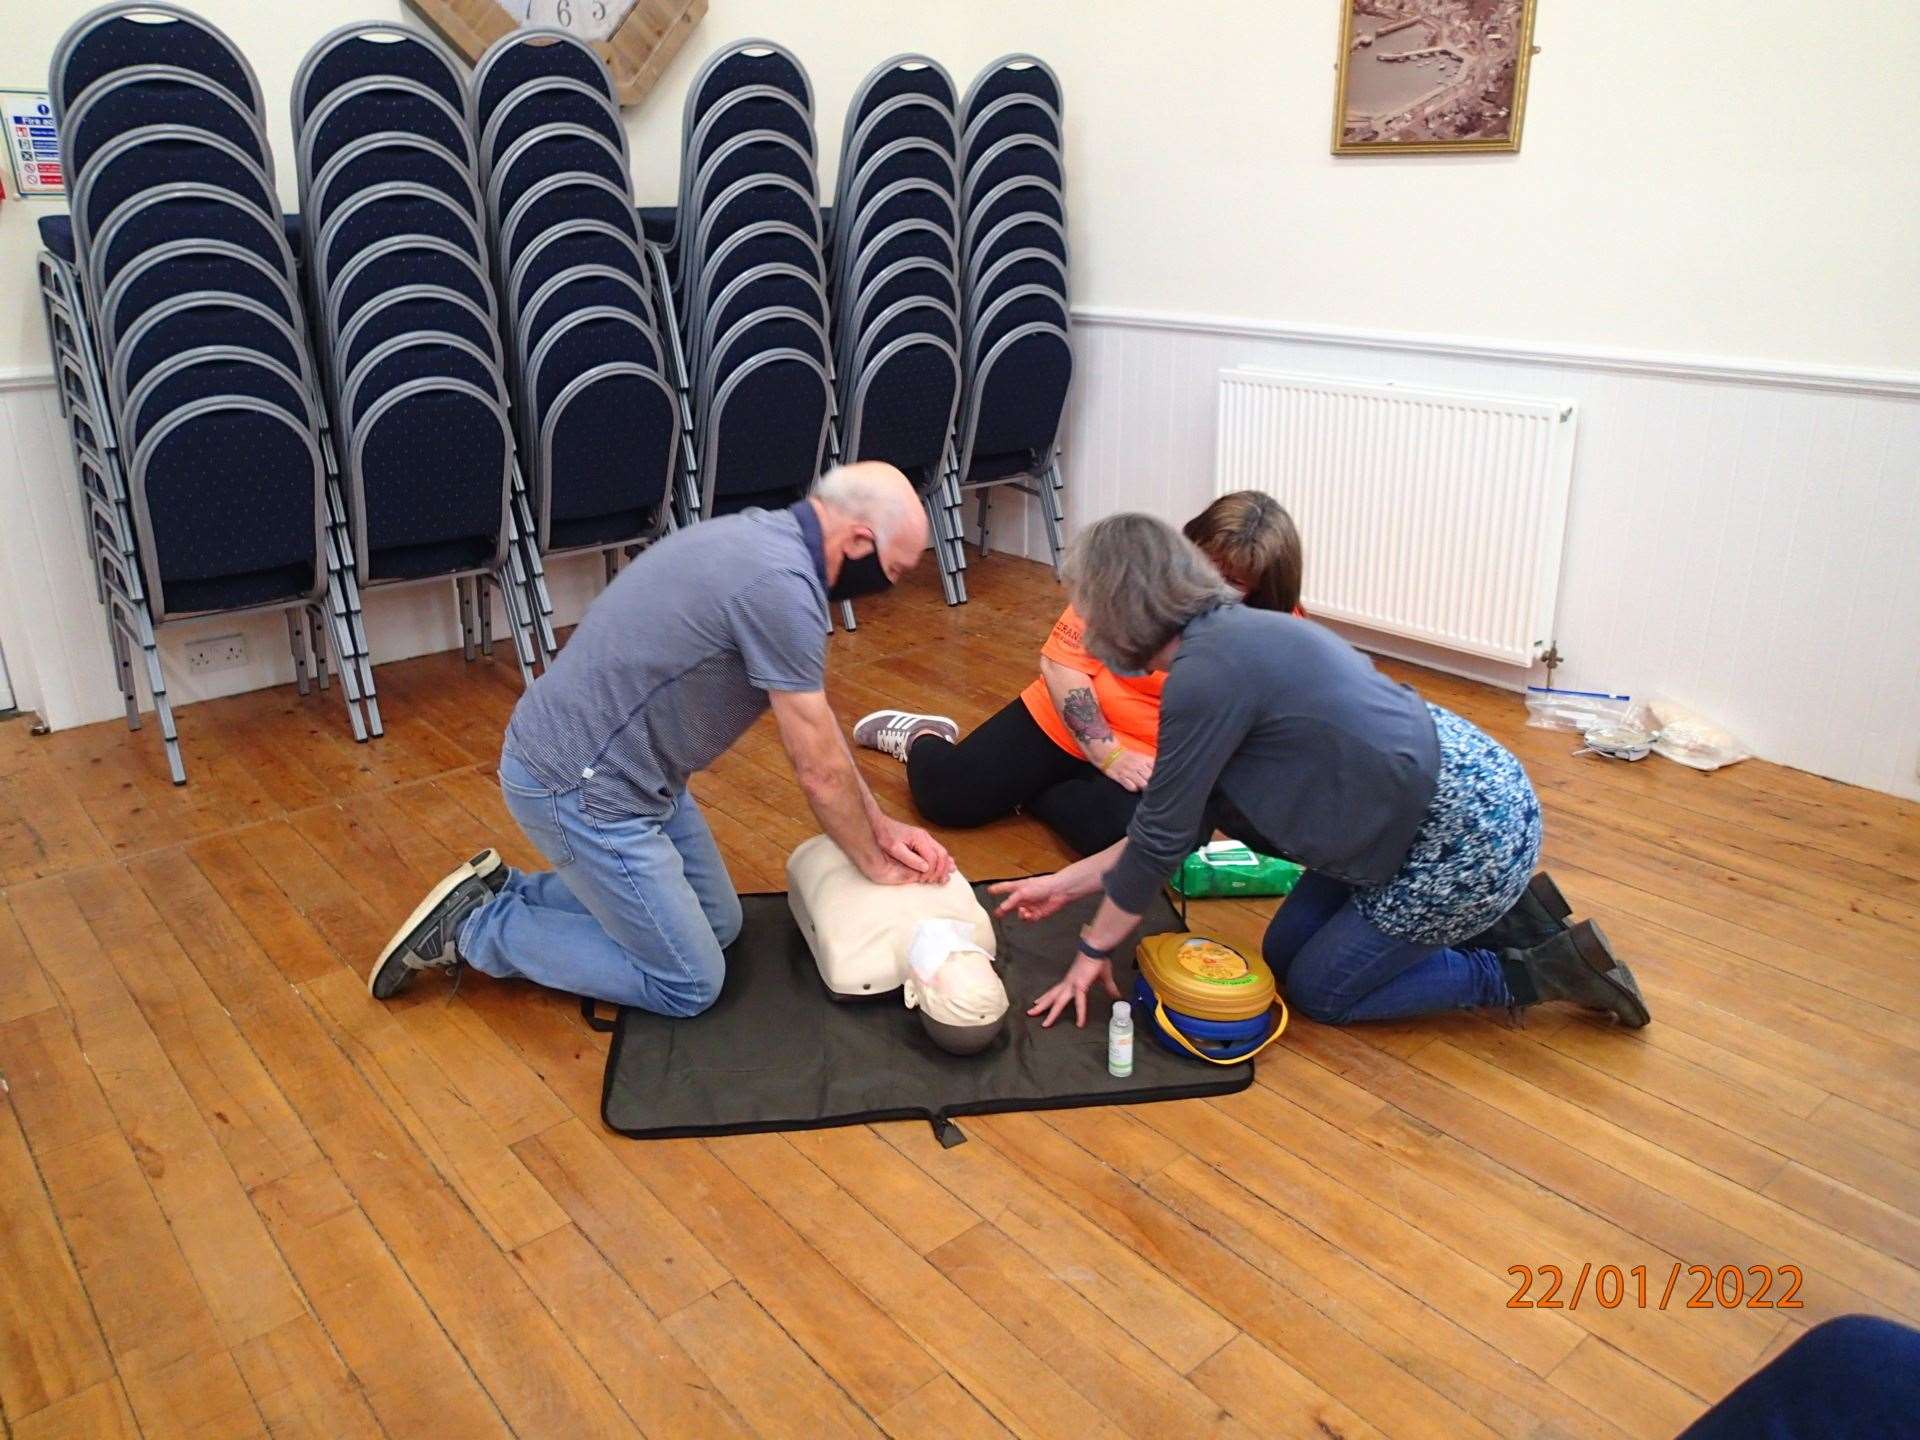 CPR training was held in Findochty Town Hall for FWSC members and staff from The Admiral's Inn.